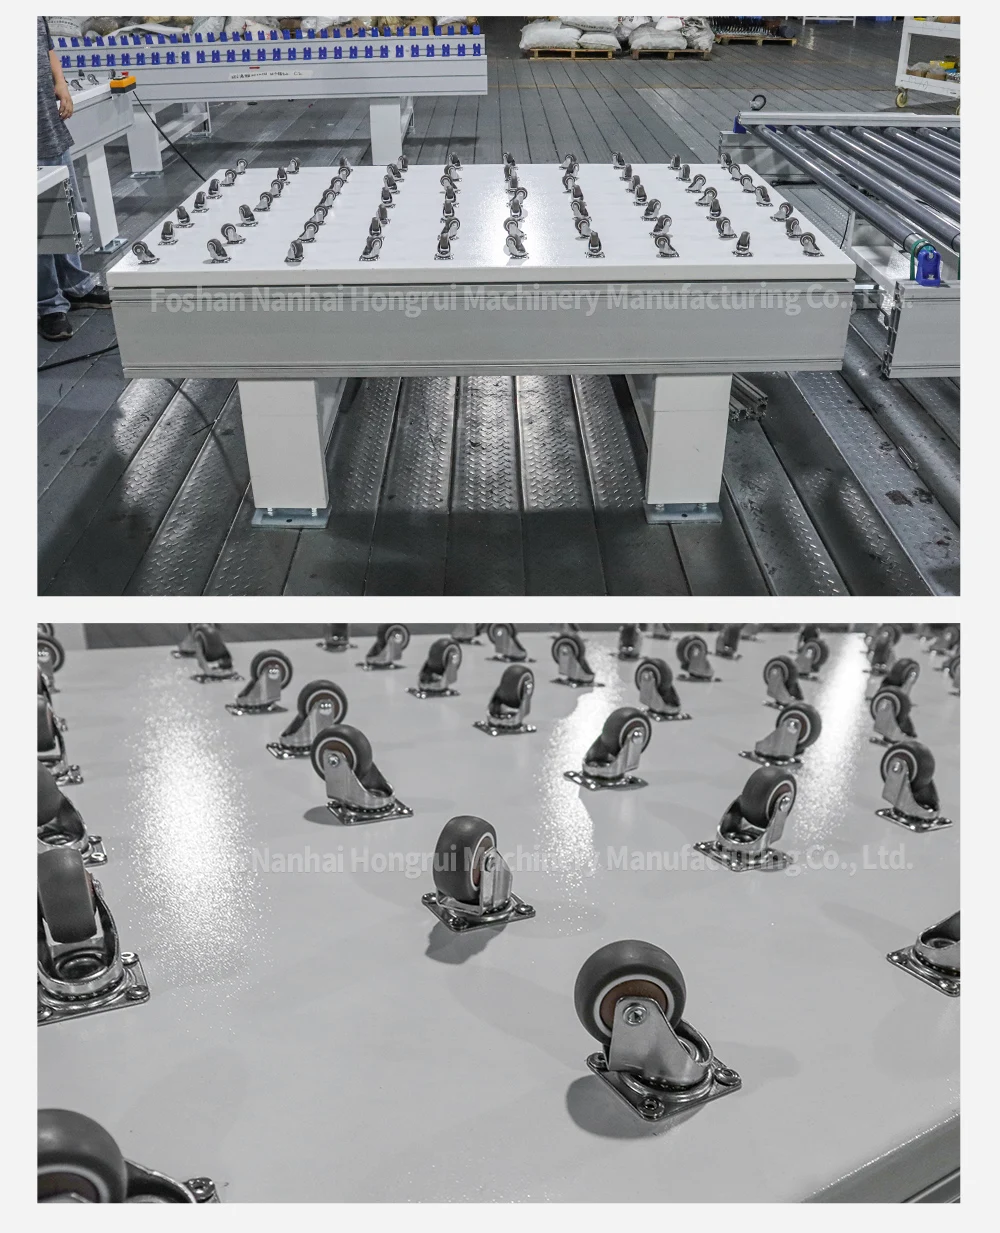 Hongrui is a customized roller table for sheet metal transportation, lifting and universal ball platform factory